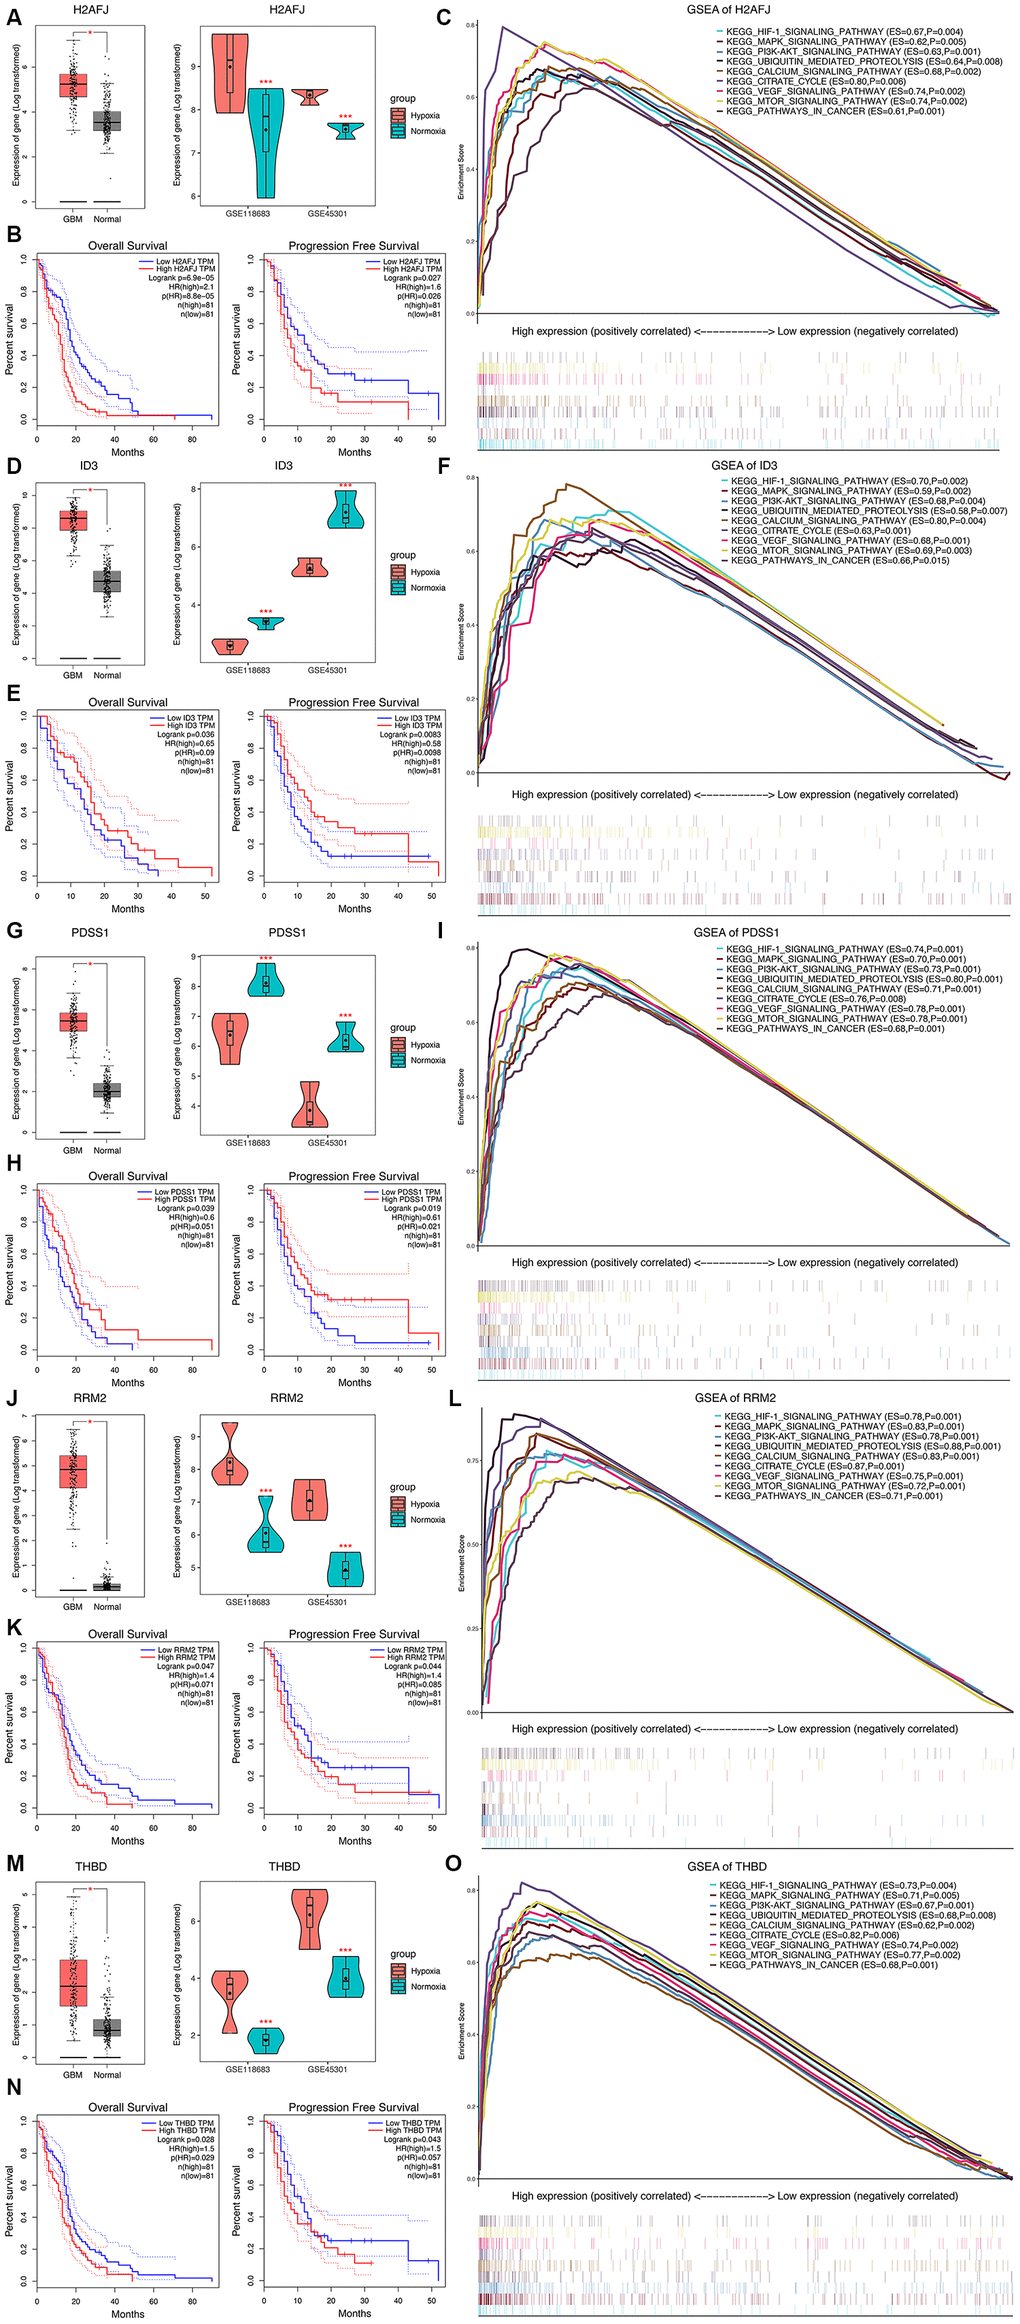 Expression analysis, survival analysis, and gene set enrichment analysis (GSEA) of the 5 HRGs in the hypoxia signature. Expression analysis of H2AFJ (A), ID3 (D), PDSS1 (G), RRM2 (J), and THBD (M). Left panel: Expression levels of the 5 HRGs in 163 GBM samples and 207 normal samples. Right panel: Expression levels of the 5 HRGs in hypoxia and normoxia cultured GBM cells from GSE118683 and GSE45301. Red asterisks mean P K–M) survival analysis of H2AFJ (B), ID3 (E), PDSS1 (H), RRM2 (K), and THBD (N). Left panel: K-M survival analysis was performed to estimate the OS of GBM patients with high and low expression levels of the corresponding HRG. Right panel: (K–M) survival analysis was performed to estimate the PFS of GBM patients with high and low expression levels of the corresponding HRG. GSEA of H2AFJ (C), ID3 (F), PDSS1 (I), RRM2 (L), and THBD (O) in the TCGA GBM cohort. The enriched KEGG pathways of the 5 HRGs are listed in the upper right. ES, enrichment score; P, nominal P value.